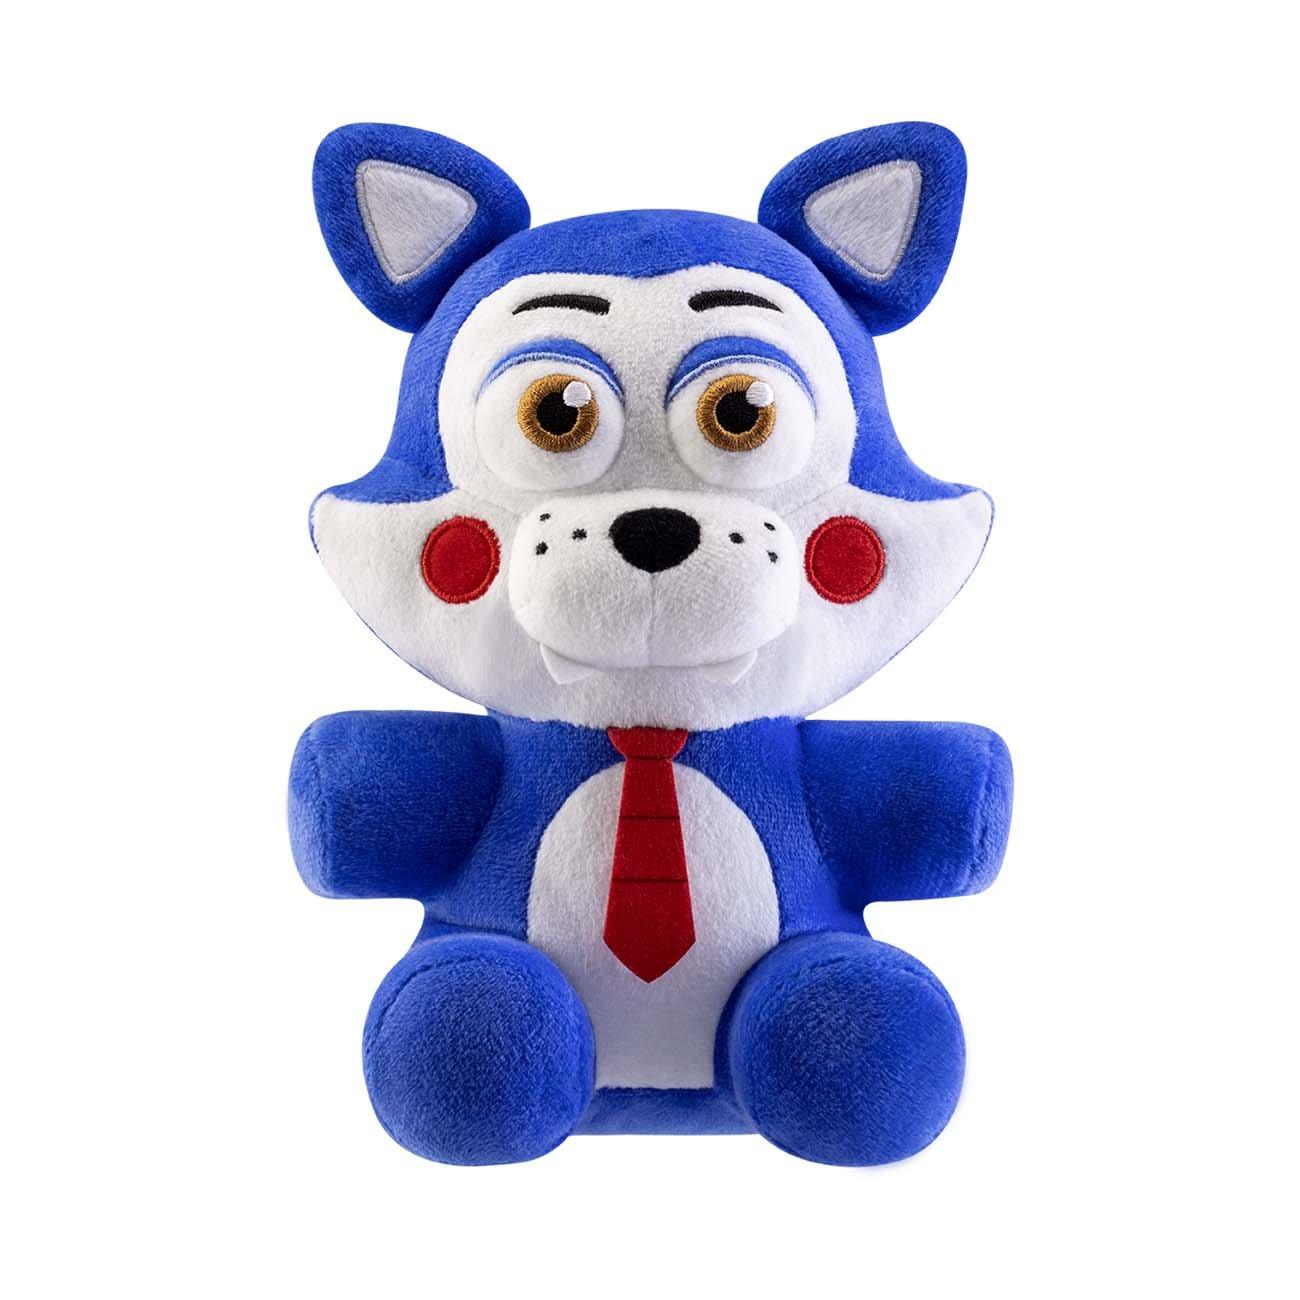 Funko Plush Five Nights at Freddy's Fanverse Candy the Cat GameStop Exclusive